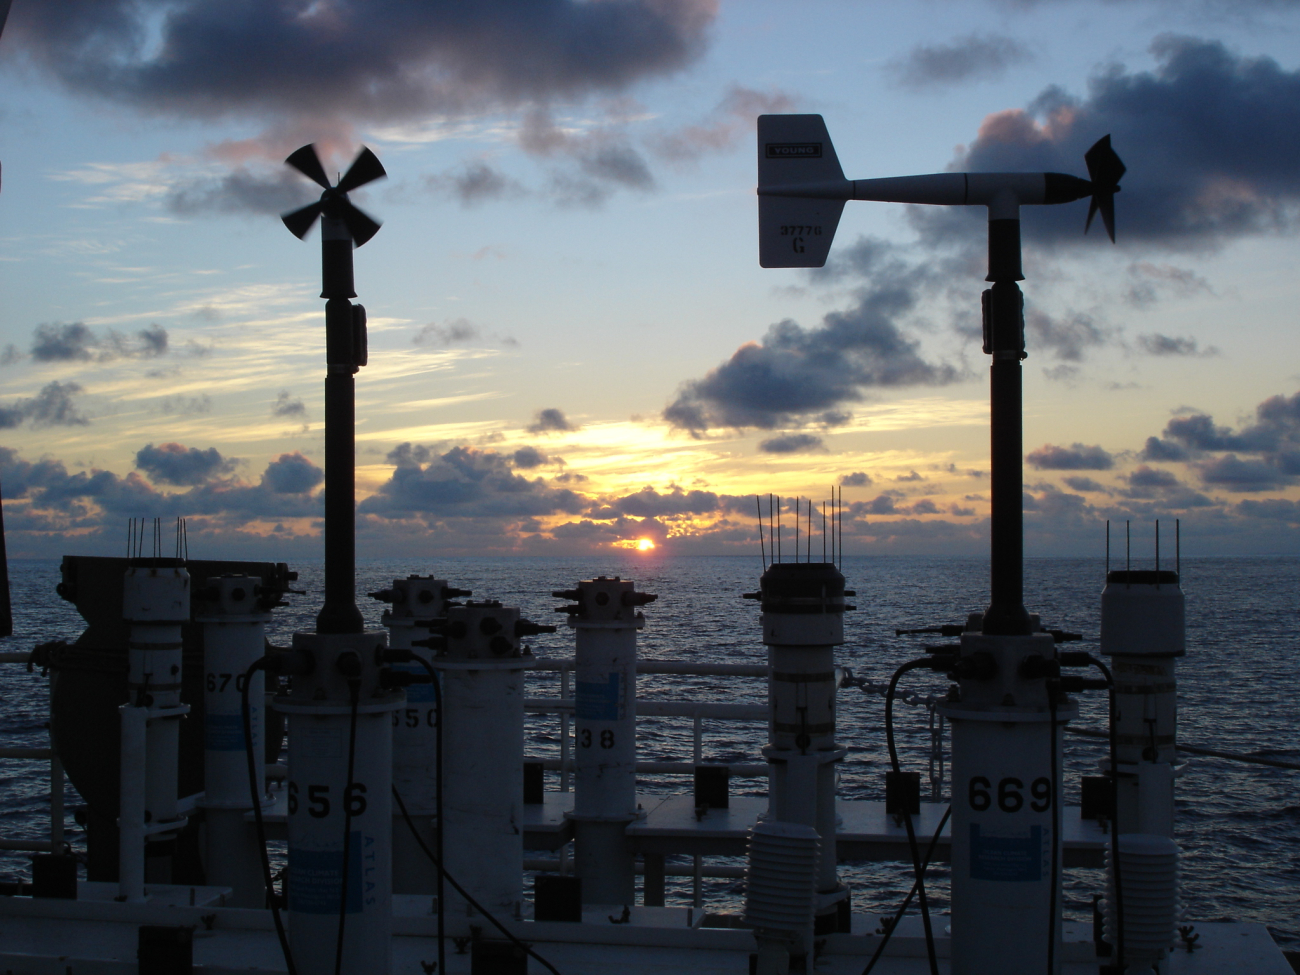 Sunset at sea seen over buoy weather sensors